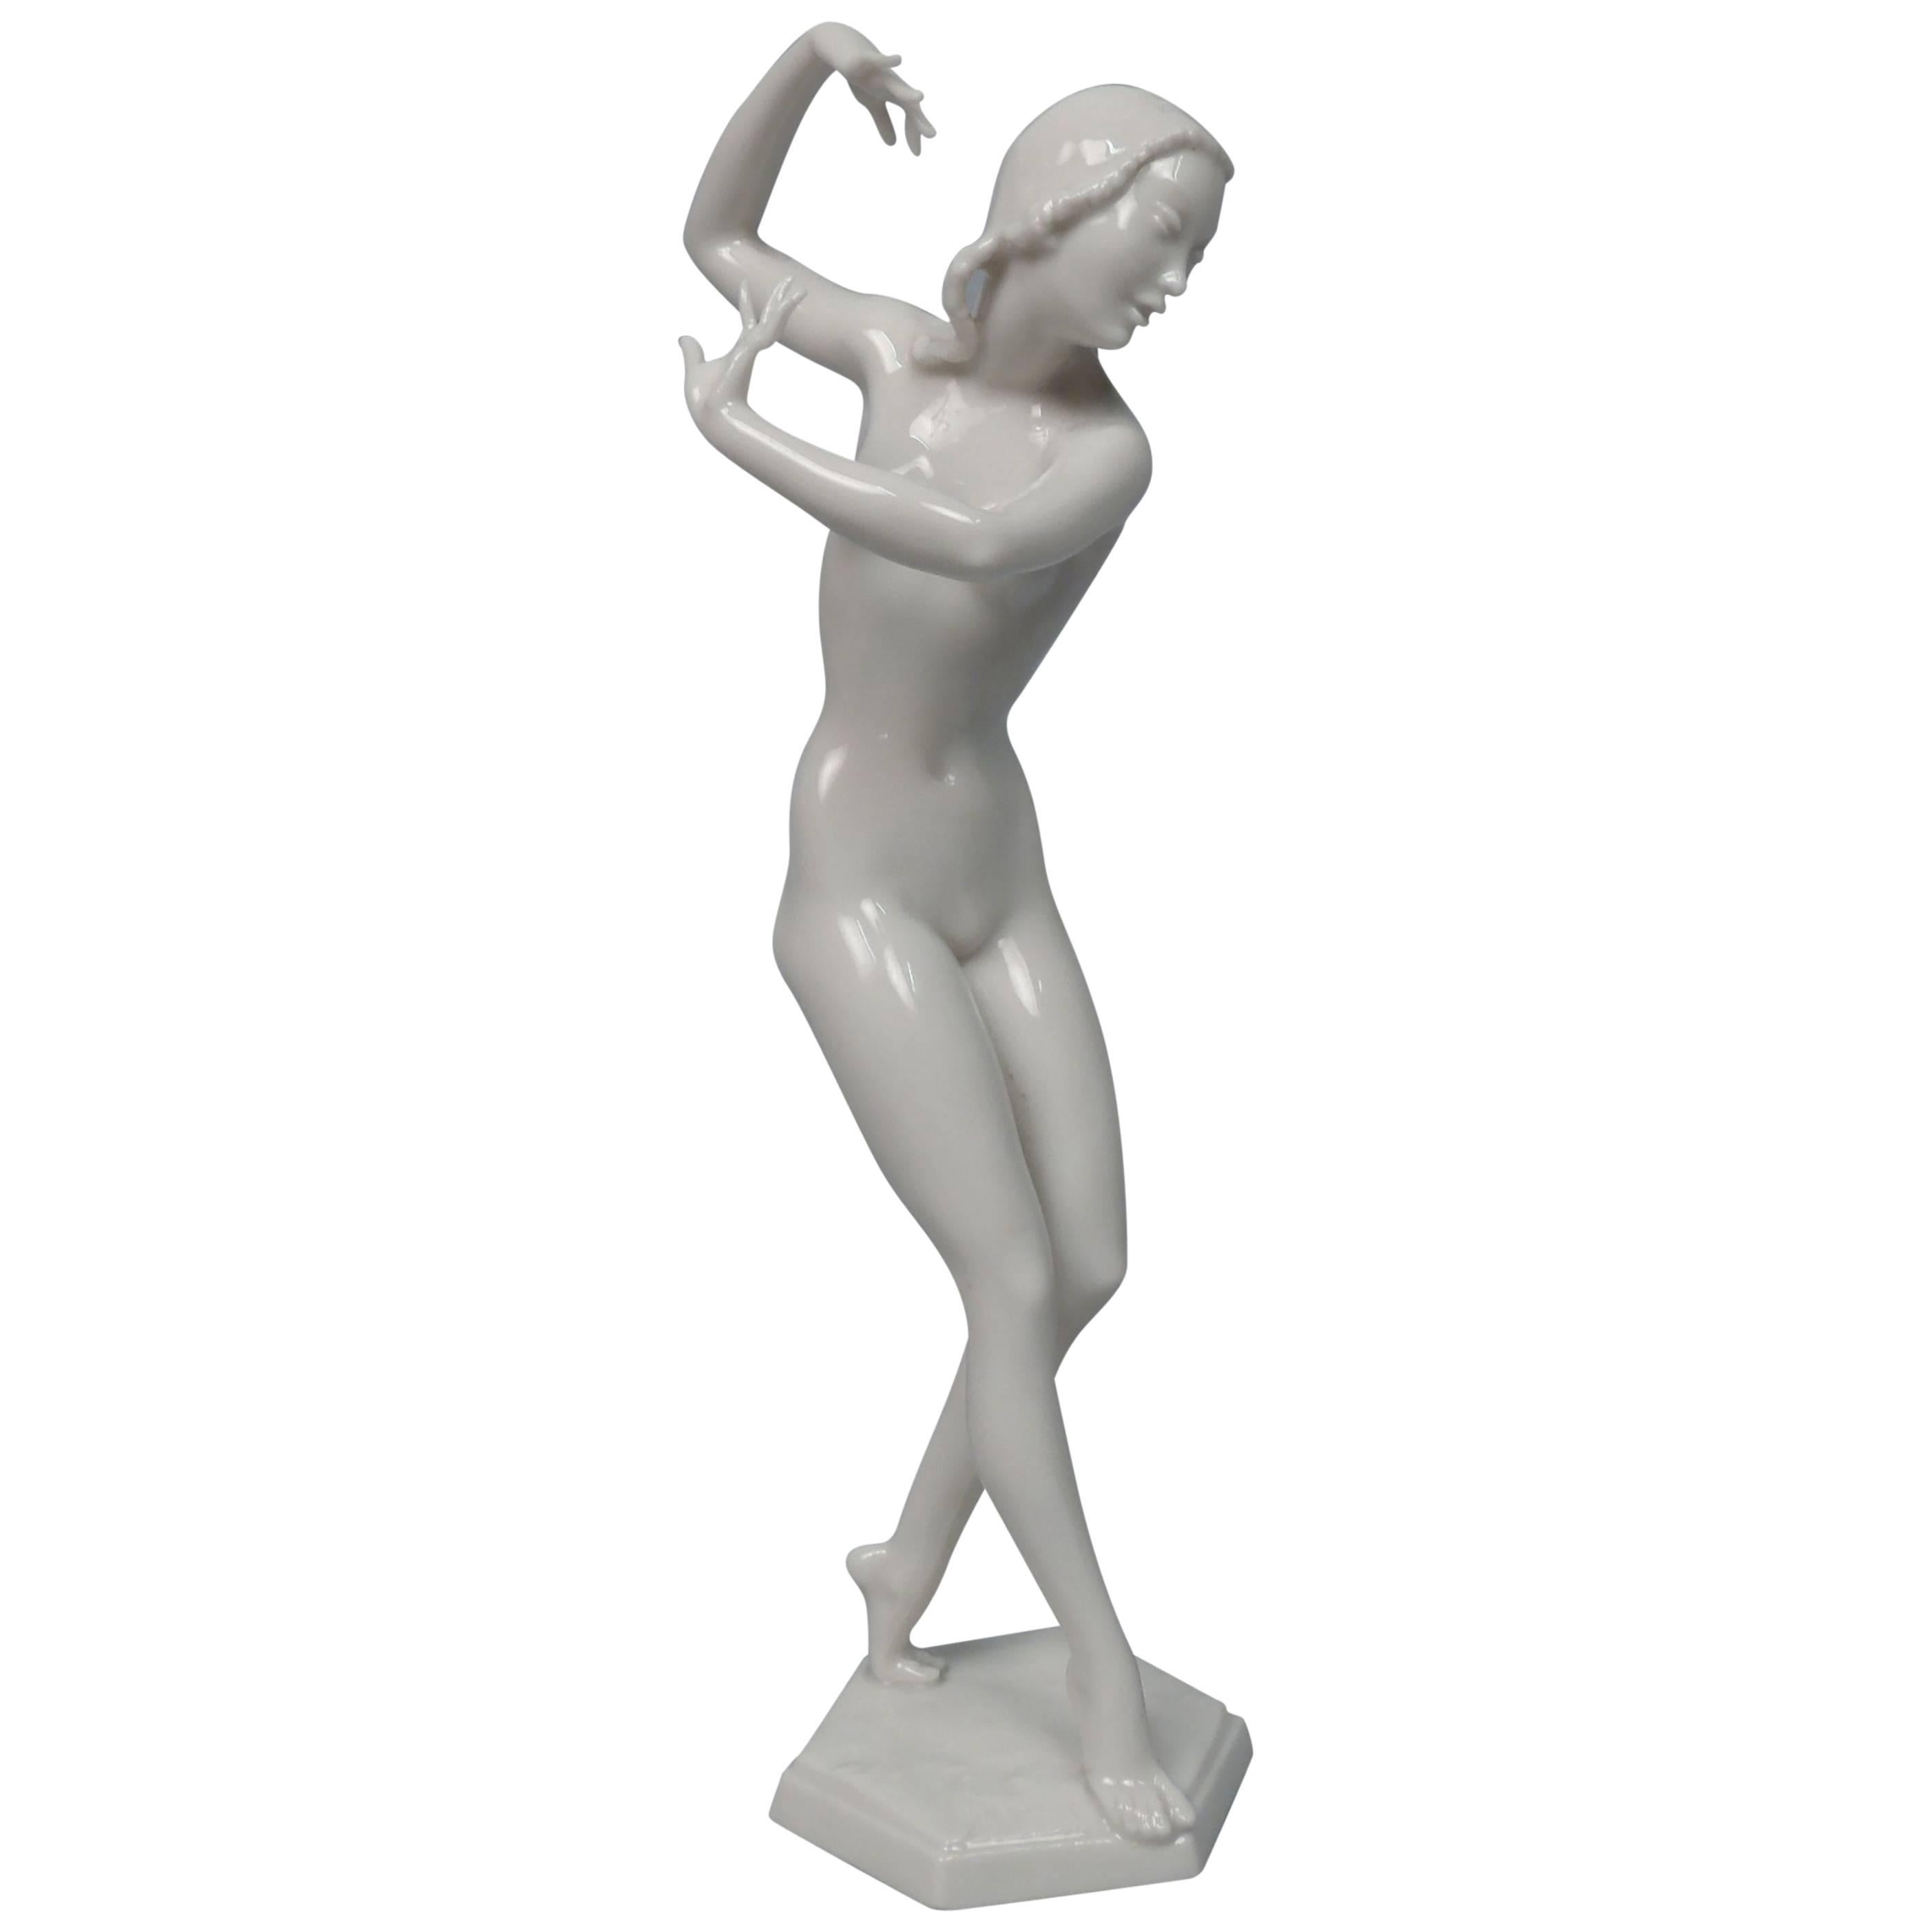 Art Deco Female Nude Figurine by Carl Werner for Hutschenreuther Porcelain